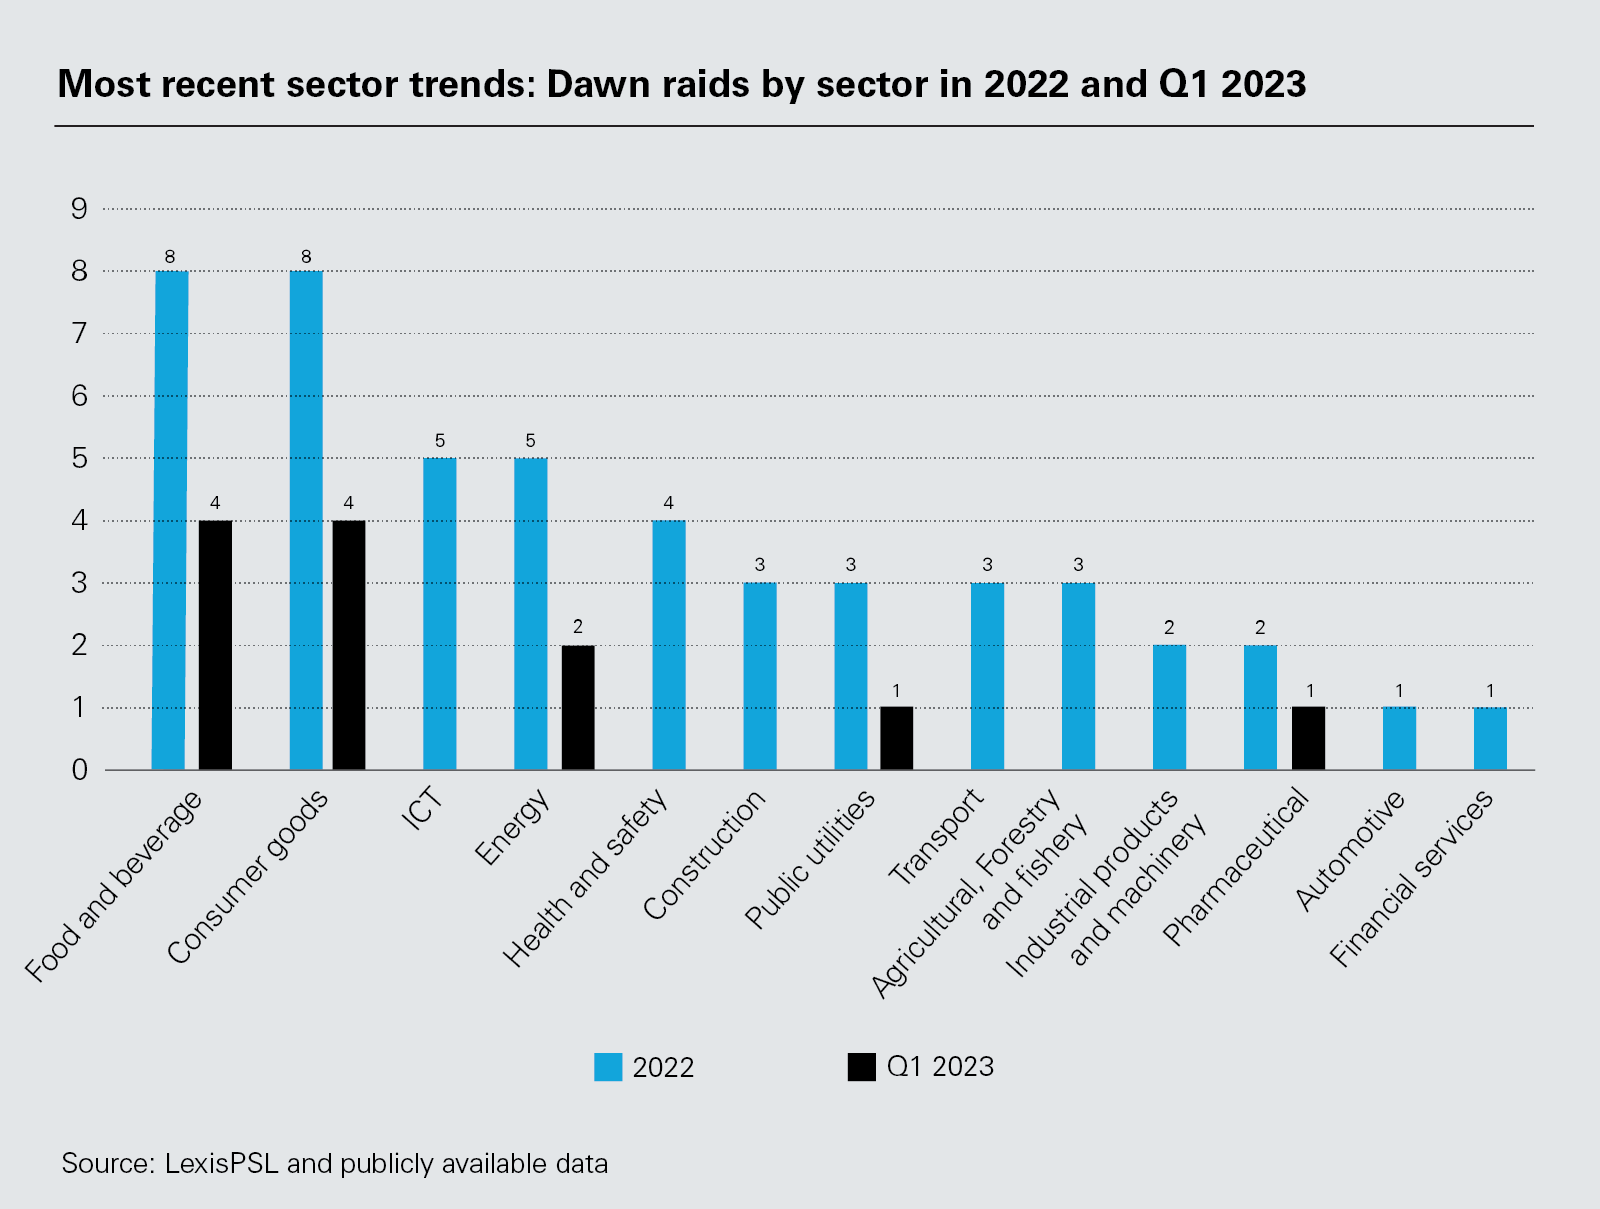 Most recent sector trends: Dawn raids by sector in 2022 and Q1 2023